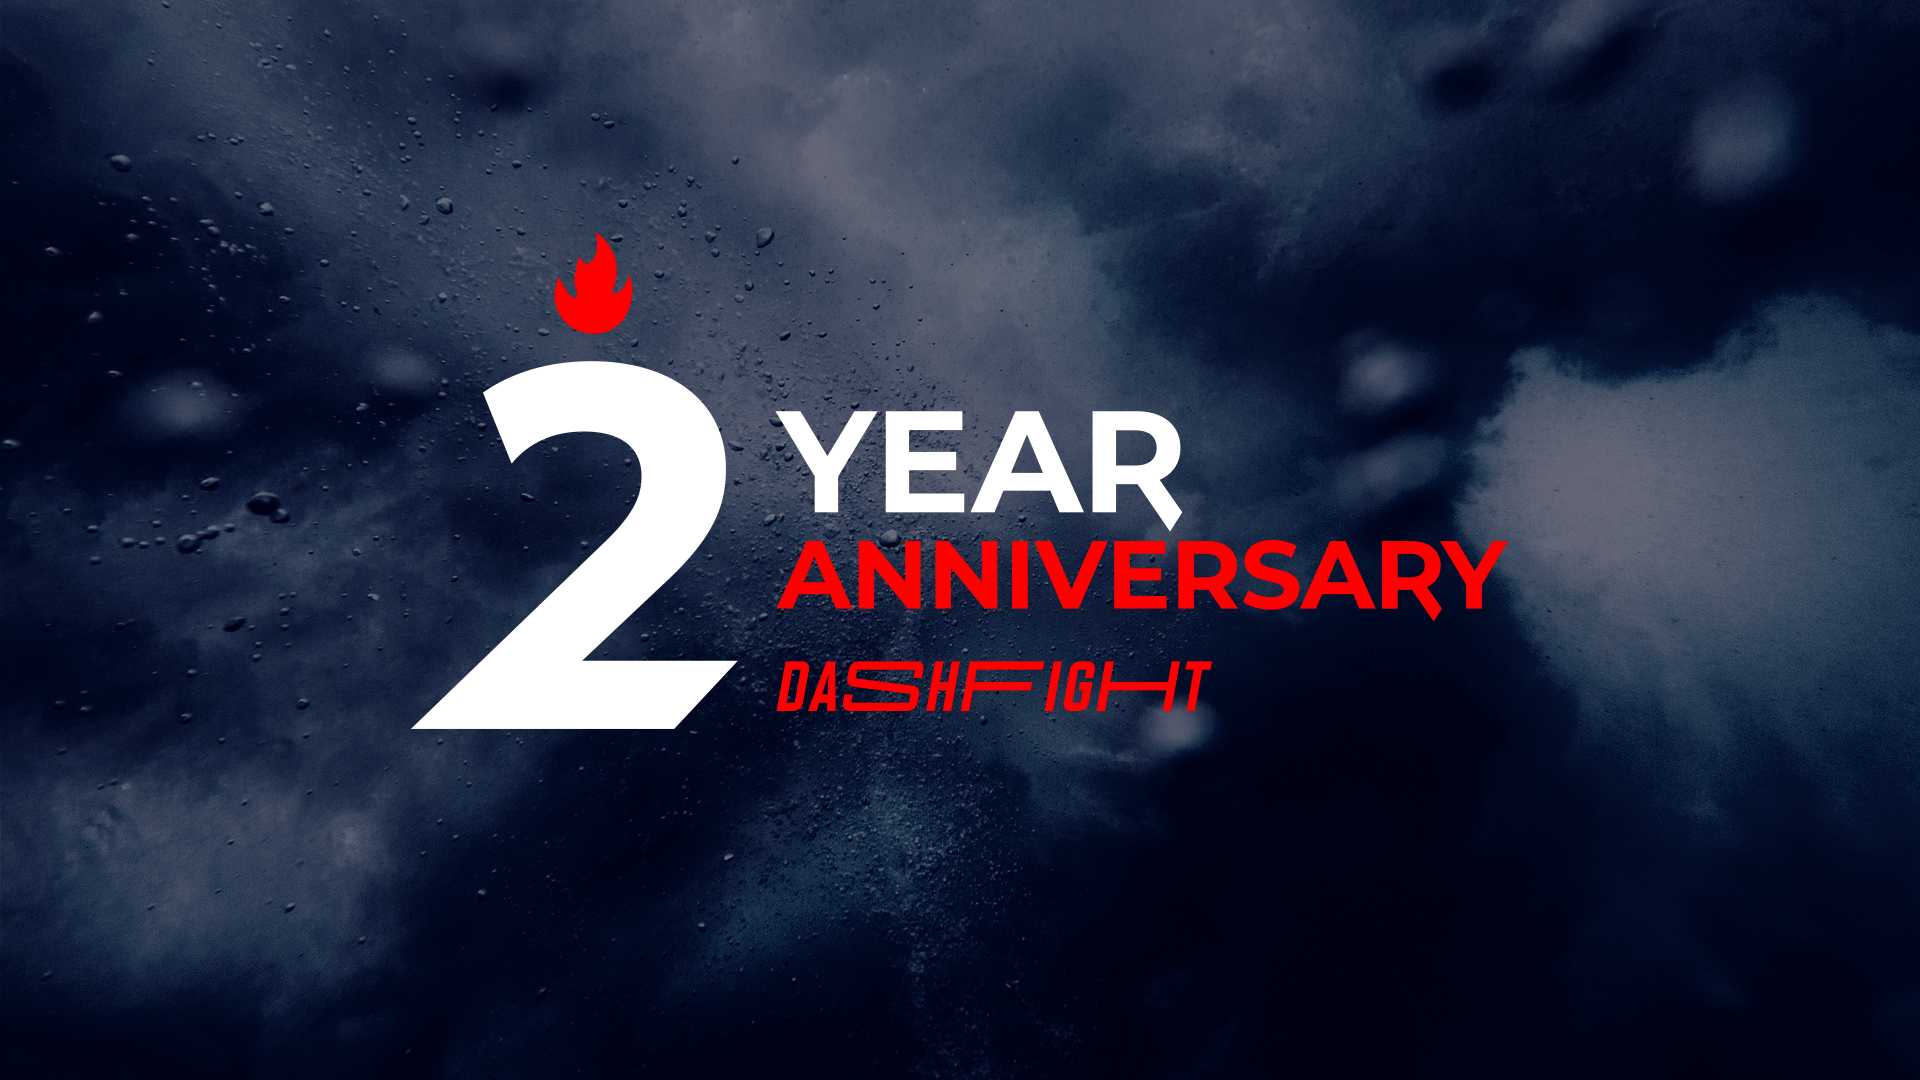 DashFight is 2 Years Old!